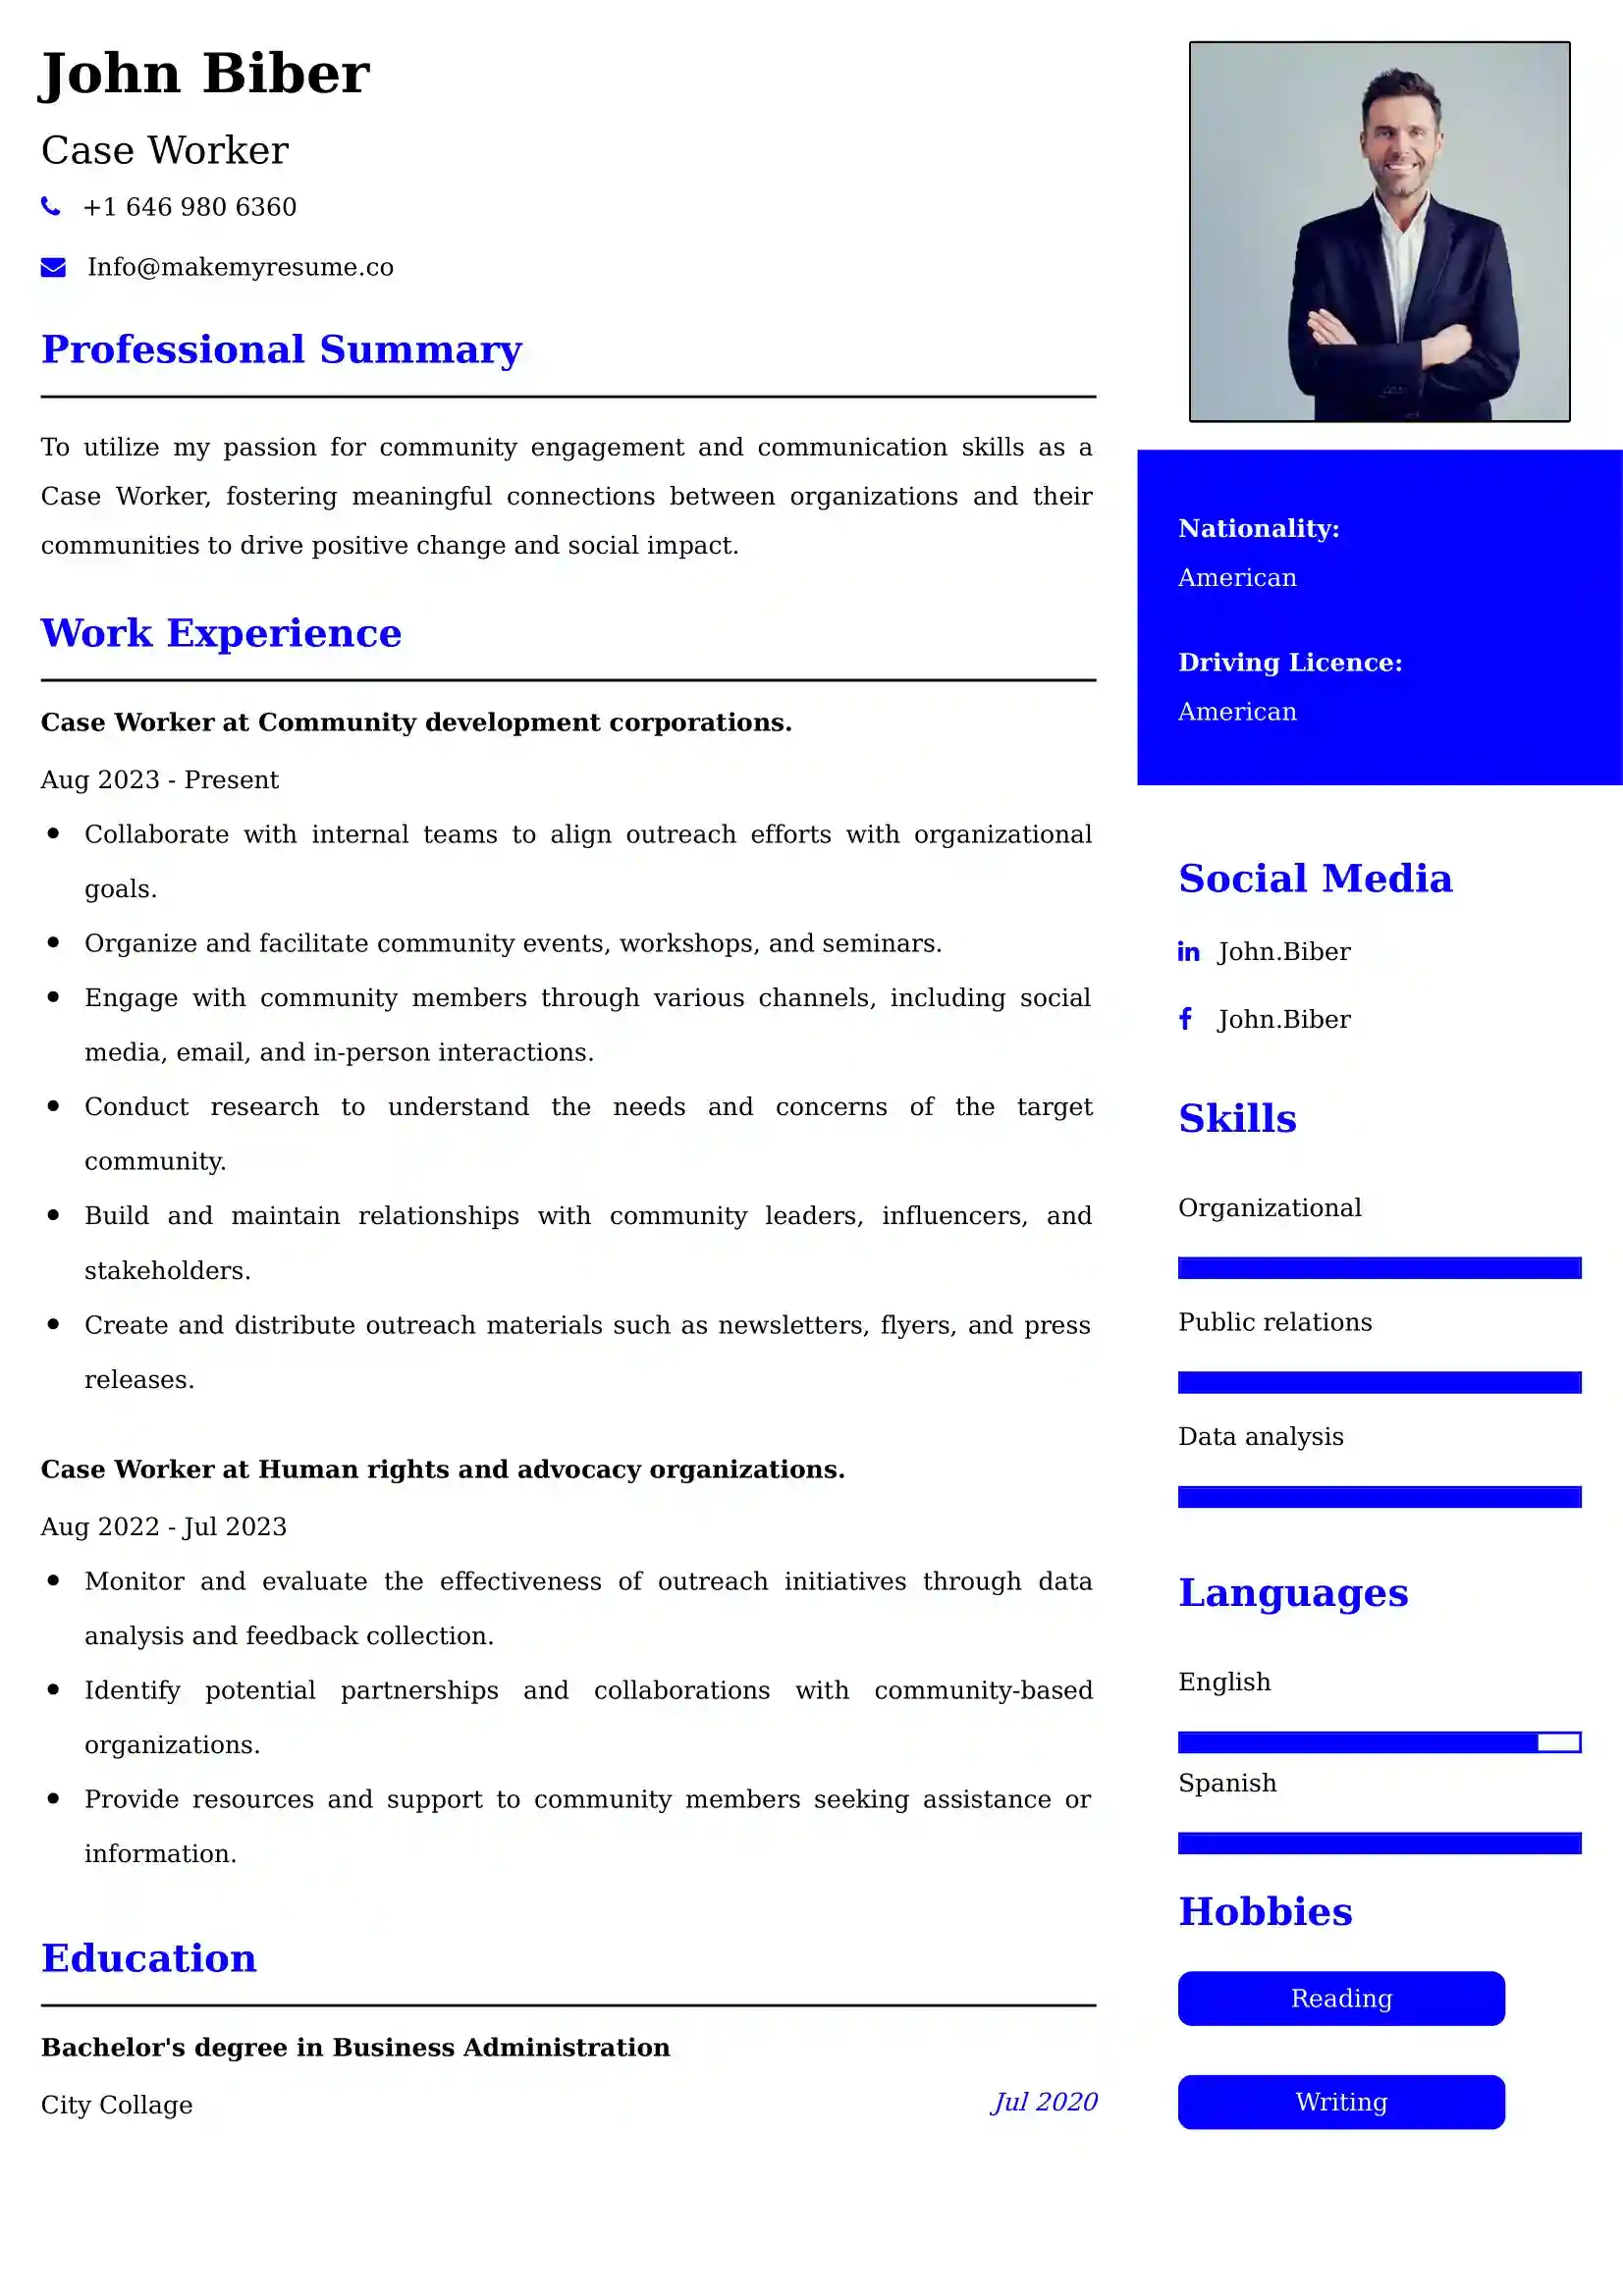 Case Worker Resume Examples for UK Jobs - Tips and Guide